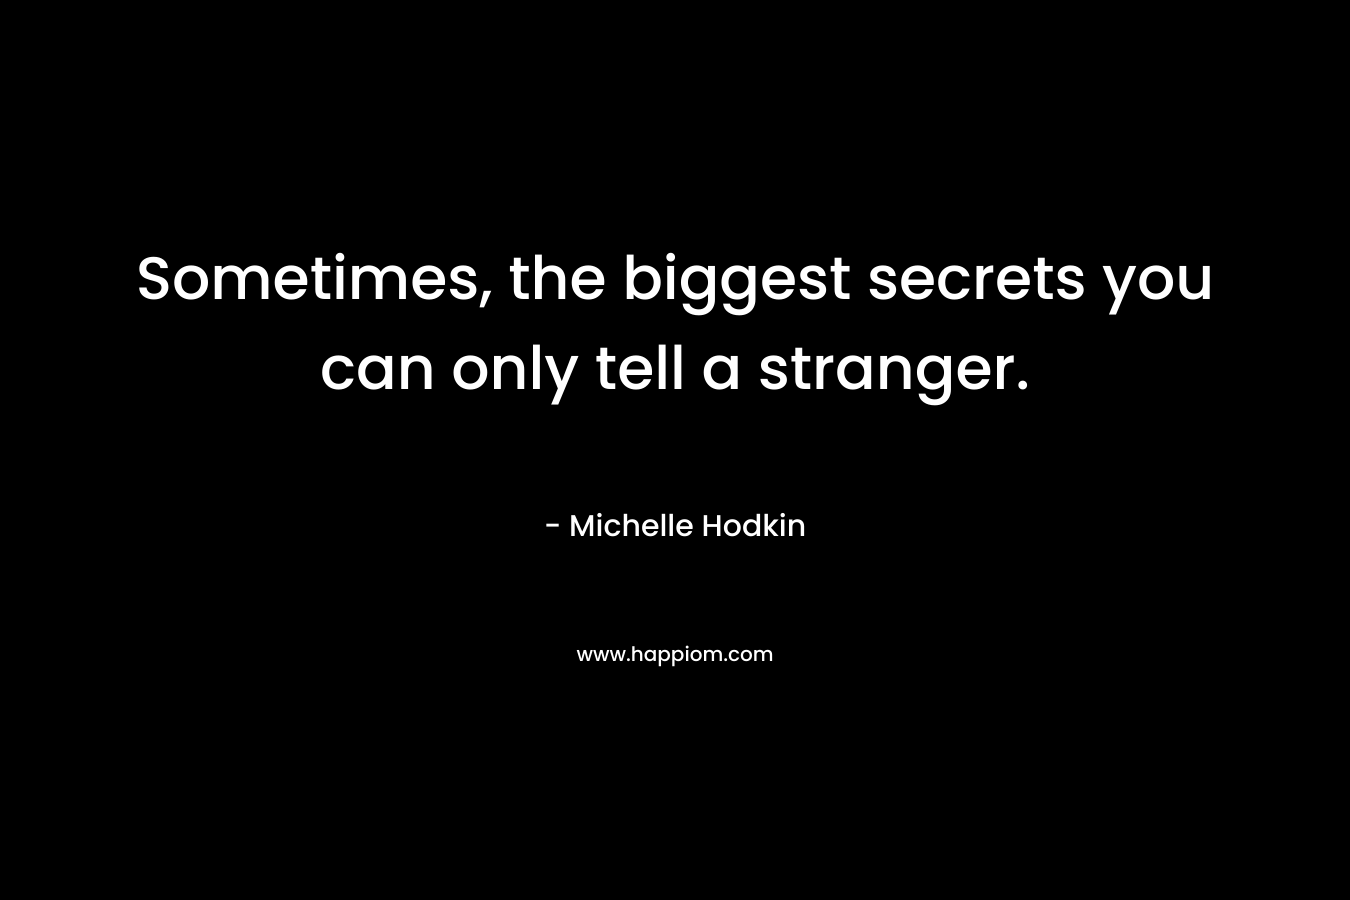 Sometimes, the biggest secrets you can only tell a stranger. – Michelle Hodkin